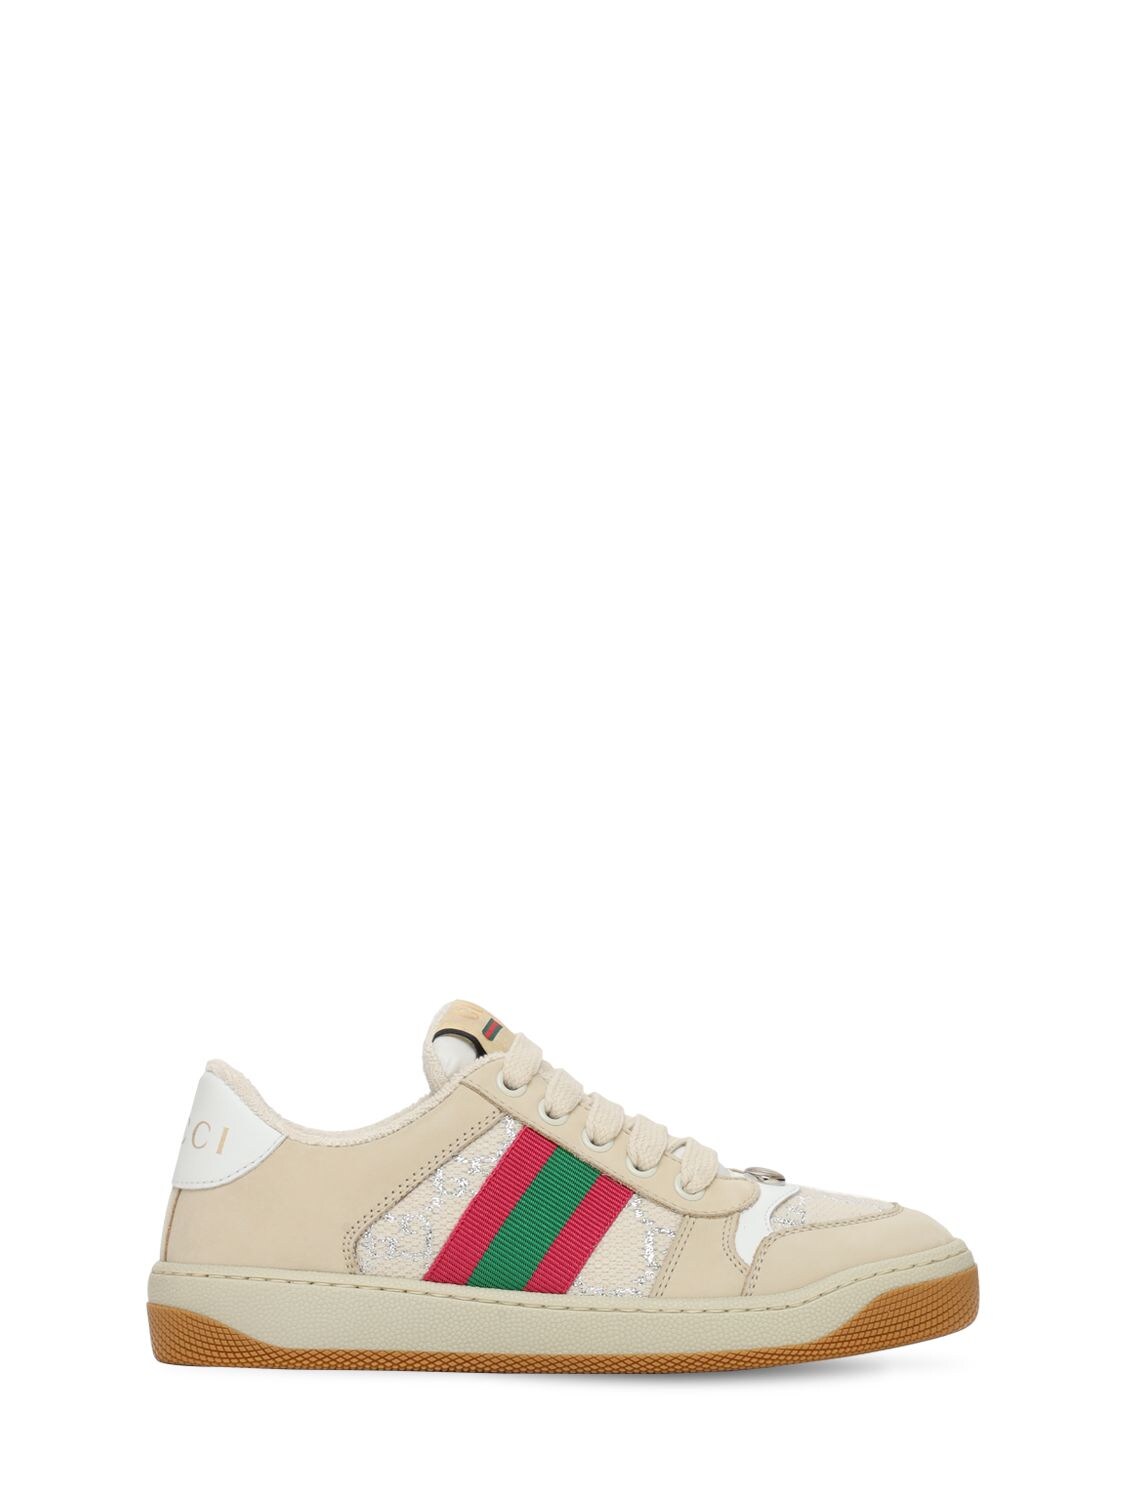 Gucci Kids' 25mm Wool Blend Trainers W/ Web Detail In Multicolor